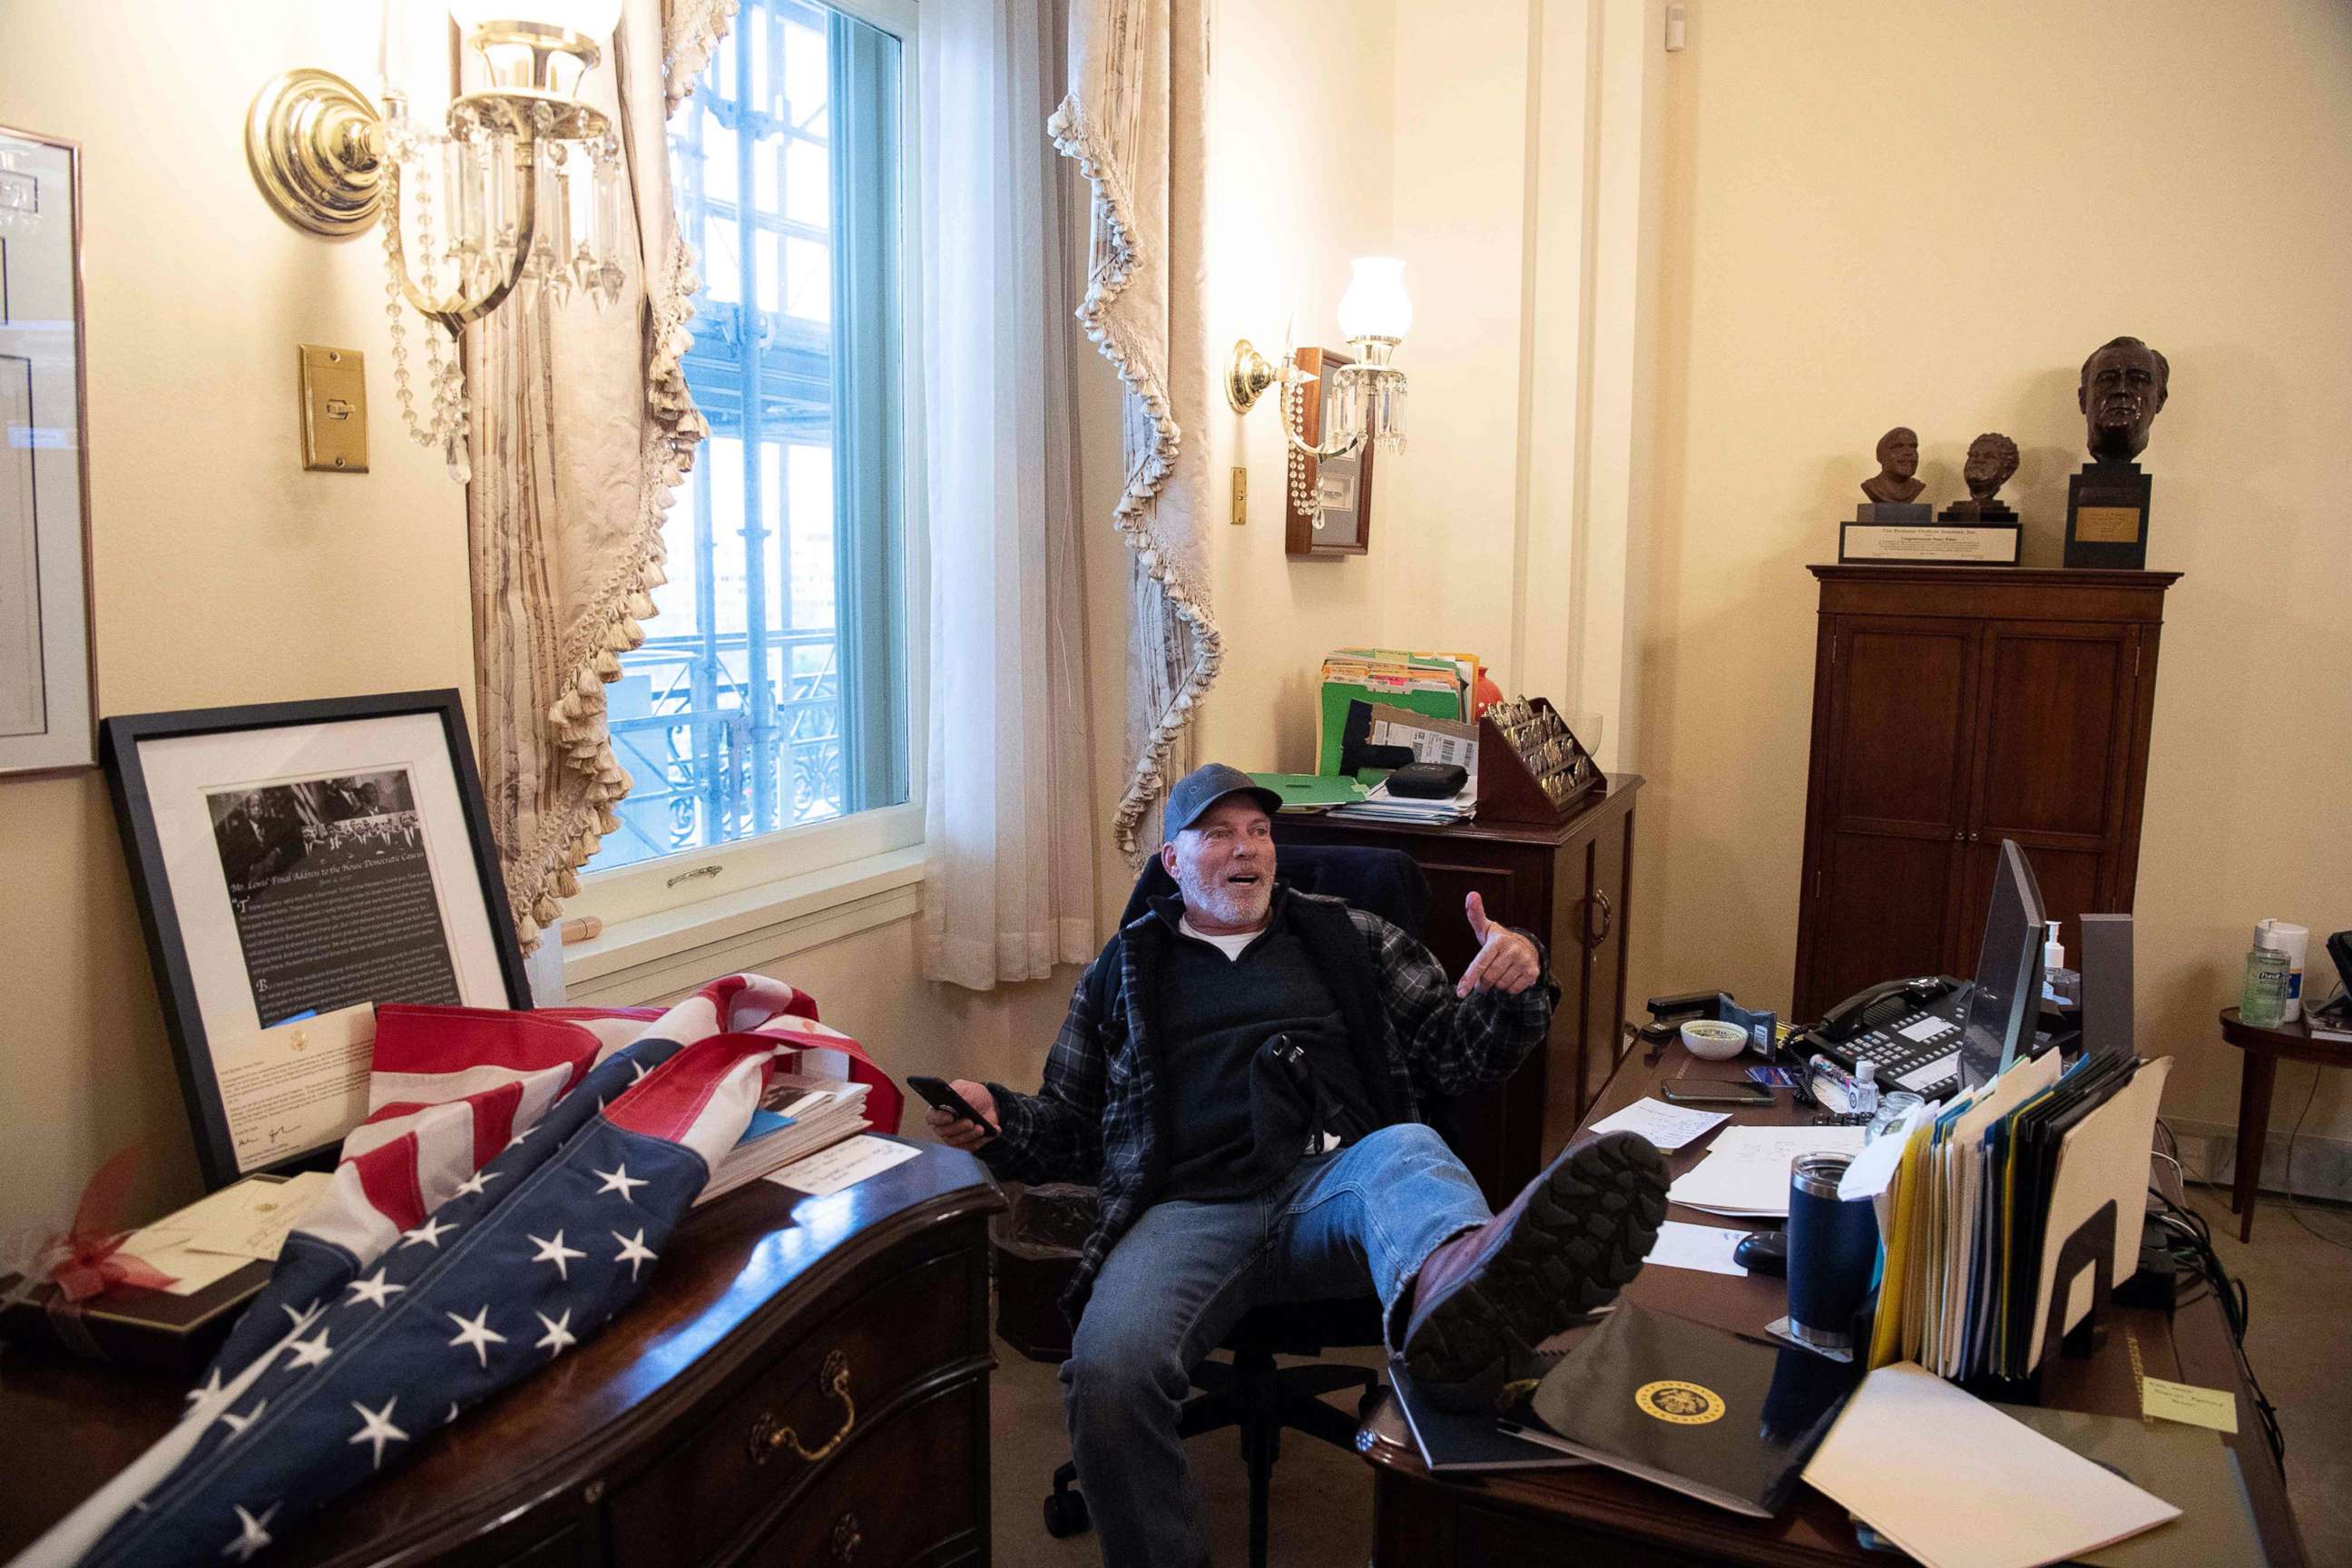 PHOTO: A supporter of President Donald Trump sits inside the office of Speaker of the House Nancy Pelosi after protesters broached the U.S. Capitol in Washington, D.C., Jan. 6, 2021, as Congress met to certify the a 2020 presidential election.